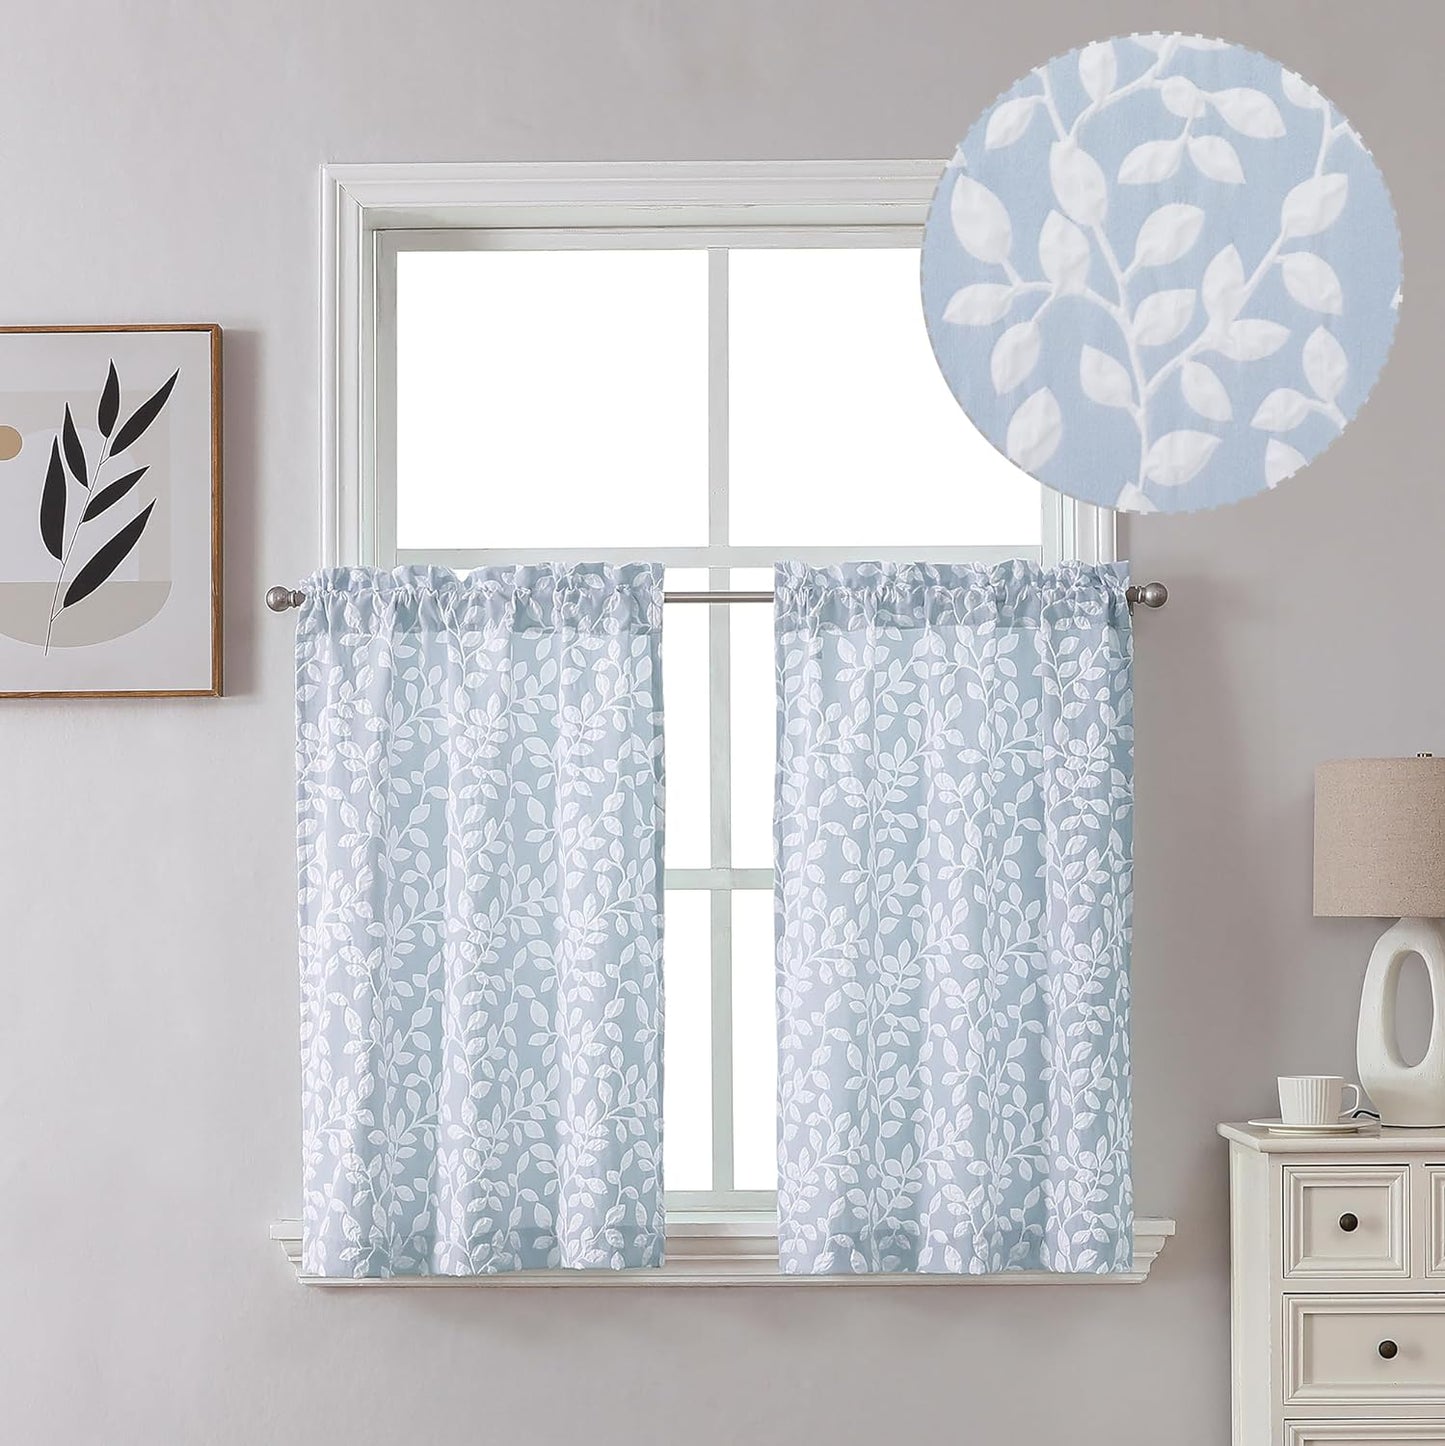 Chyhomenyc Anna White Taupe Curtains 63 Inch Length 2 Panels, Light Filtering Soft Airy 3D Embossed Textured Leaf Pattern Drapes for Bedroom Living Room Windows, Each 42Wx63L Inches  Chyhomenyc Blue White 28 W X 36 L 